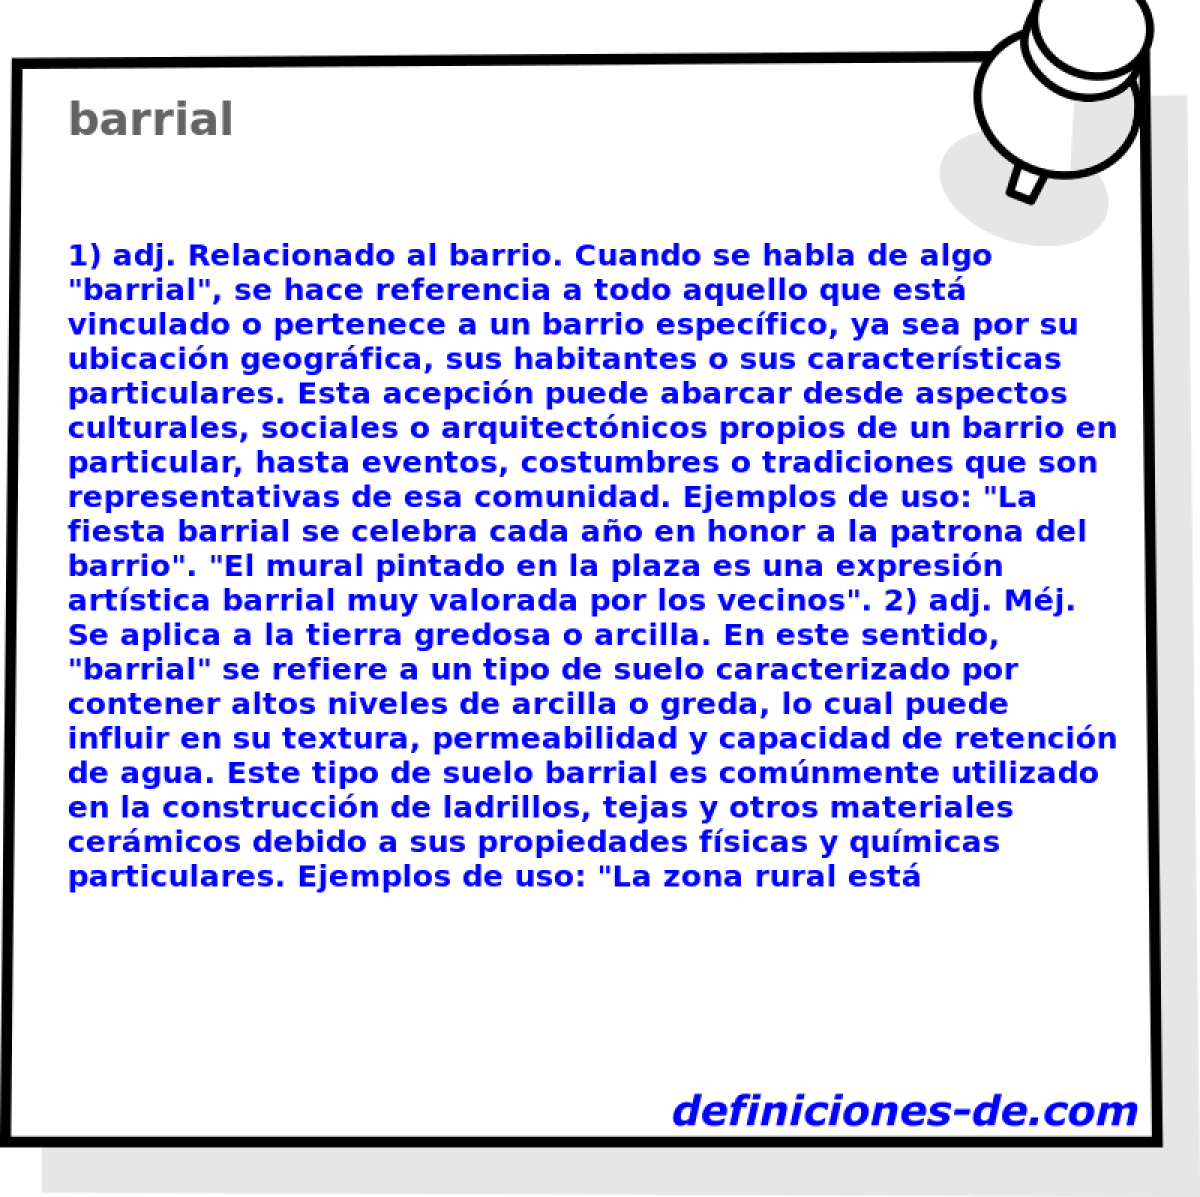 barrial 